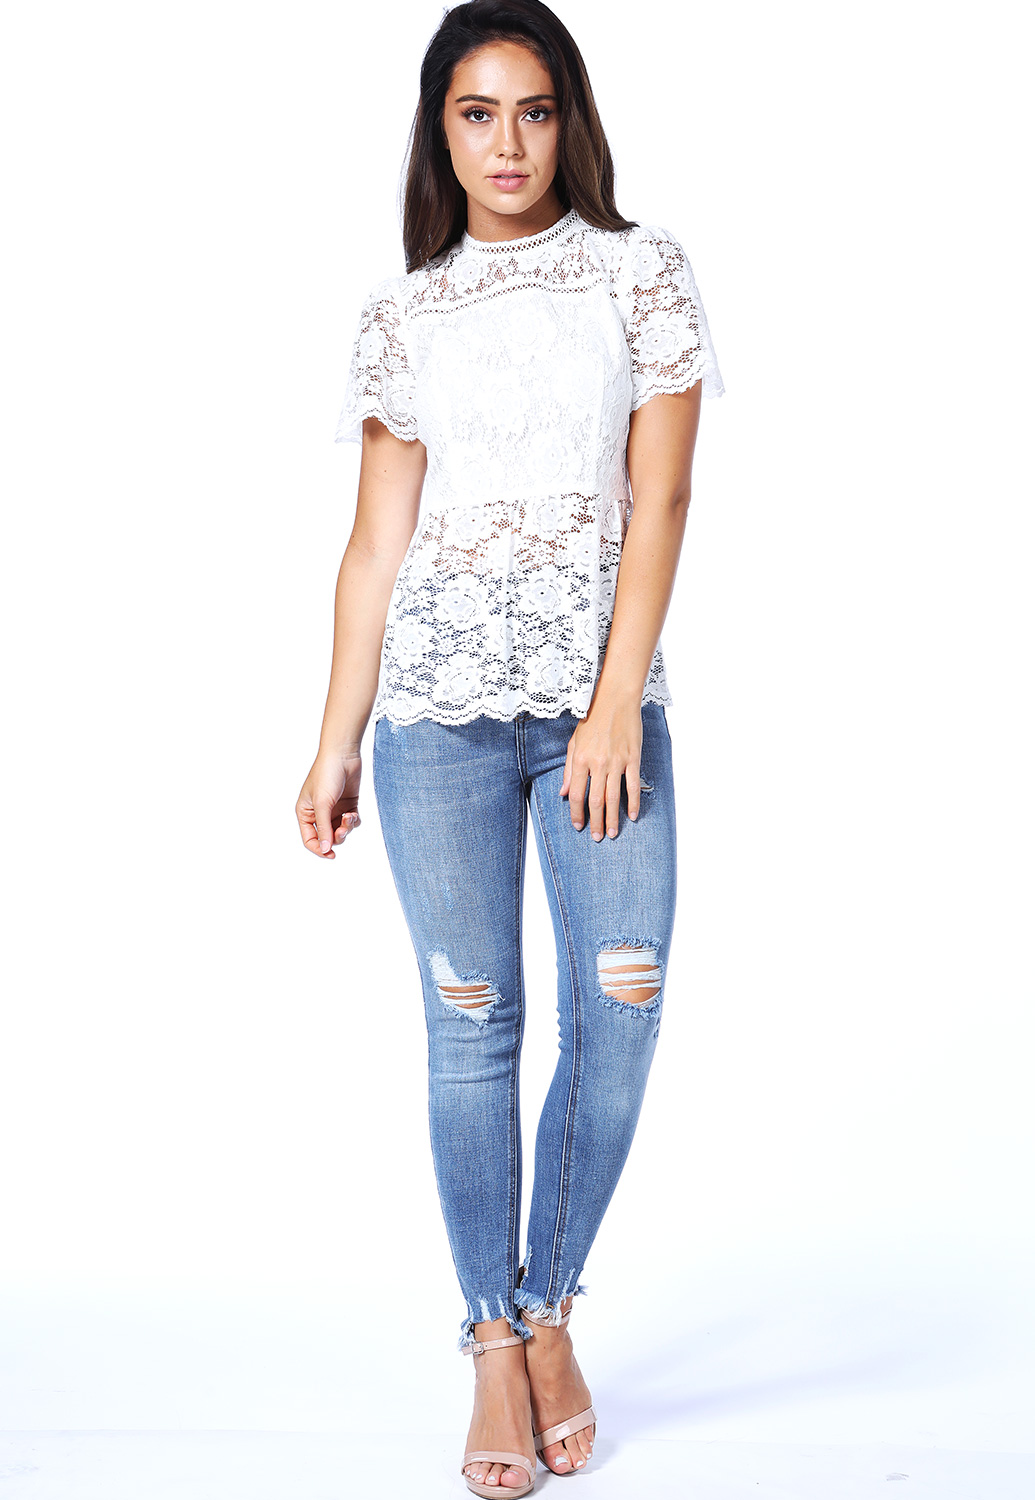 Sheer Floral Lace Top